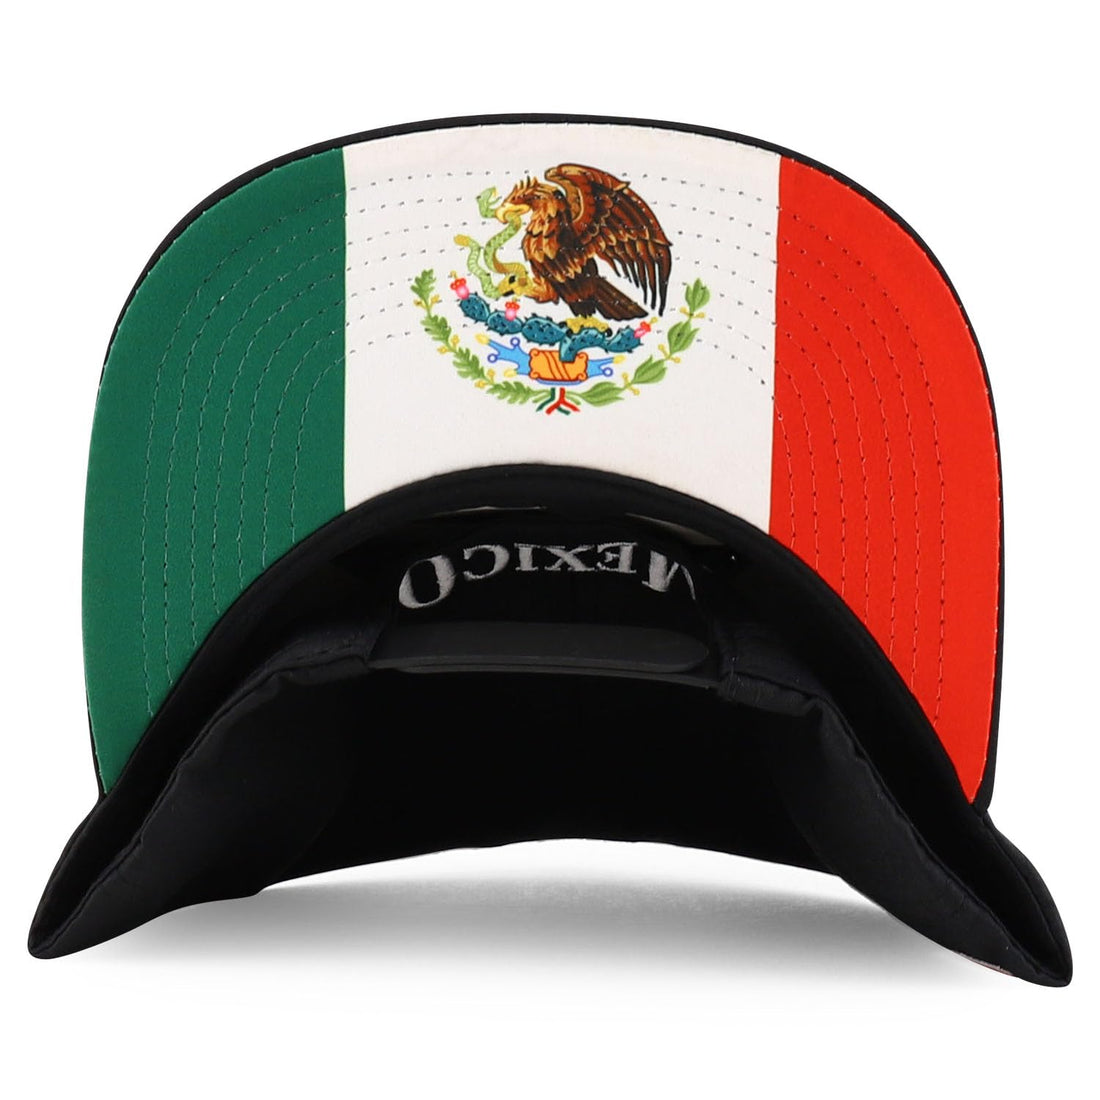 Trendy Apparel Shop Cities of Mexico with Rooster Embroidered Flatbill Snapback Cap